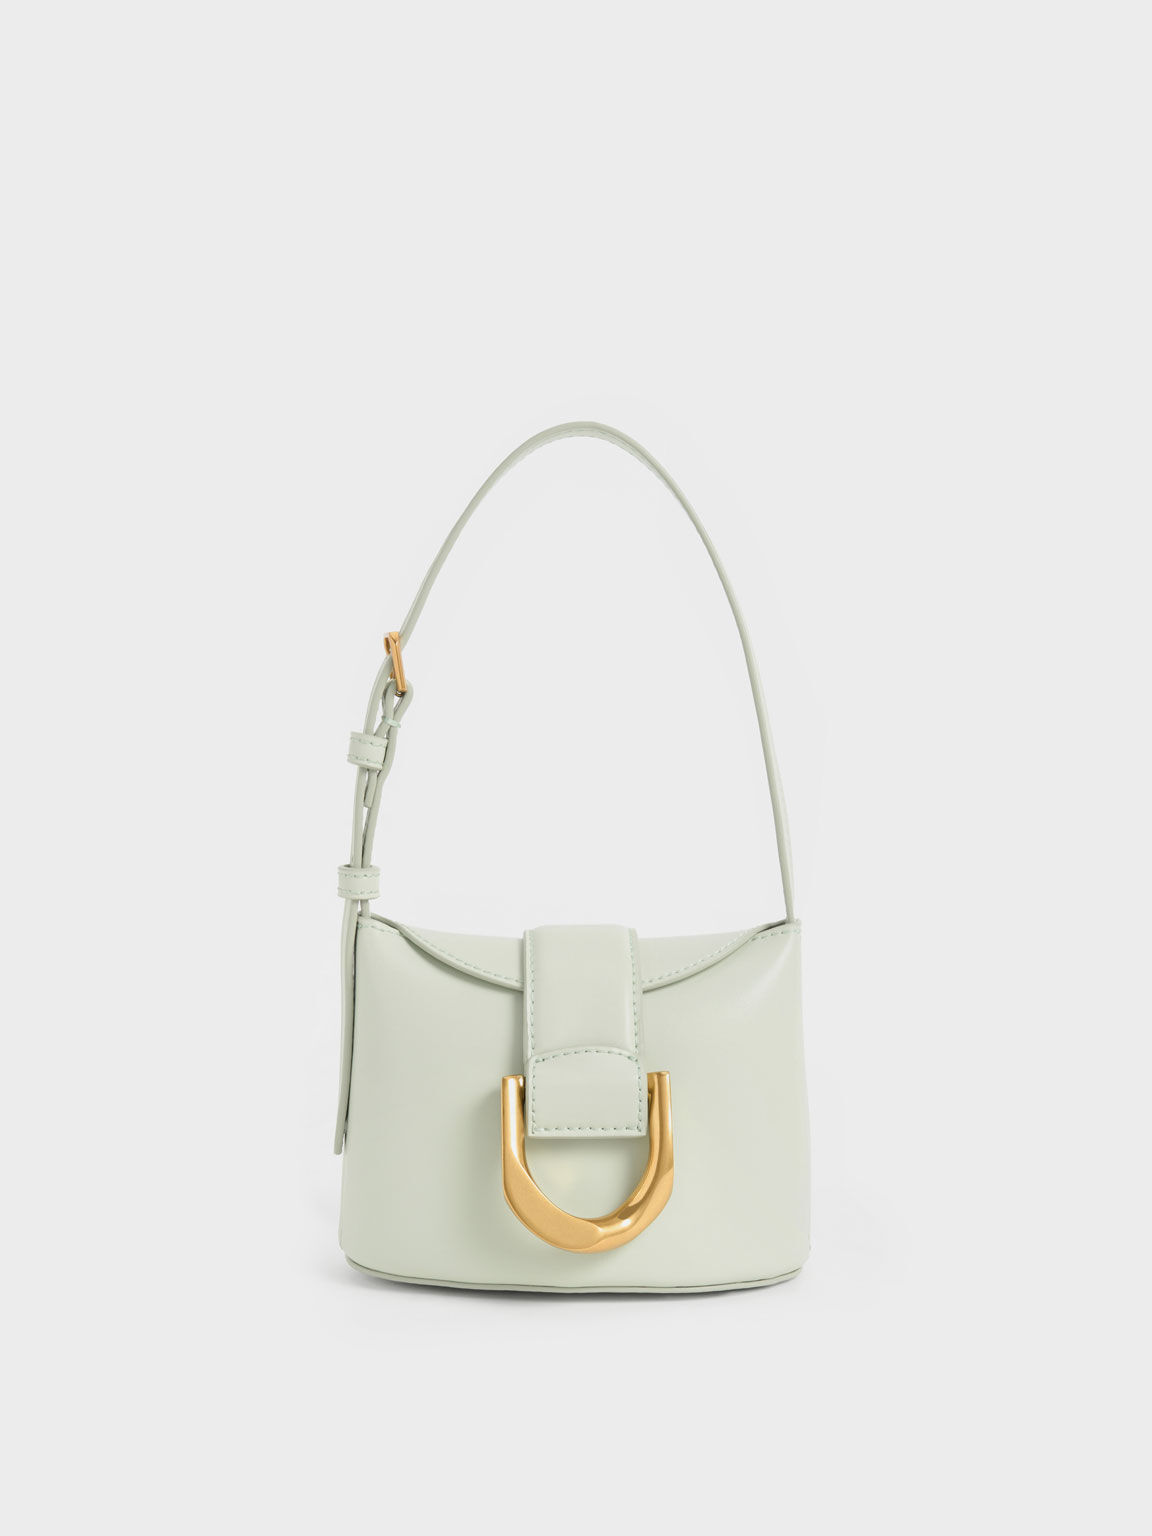 Women's Bags | Shop Exclusive Styles - CHARLES & KEITH TW